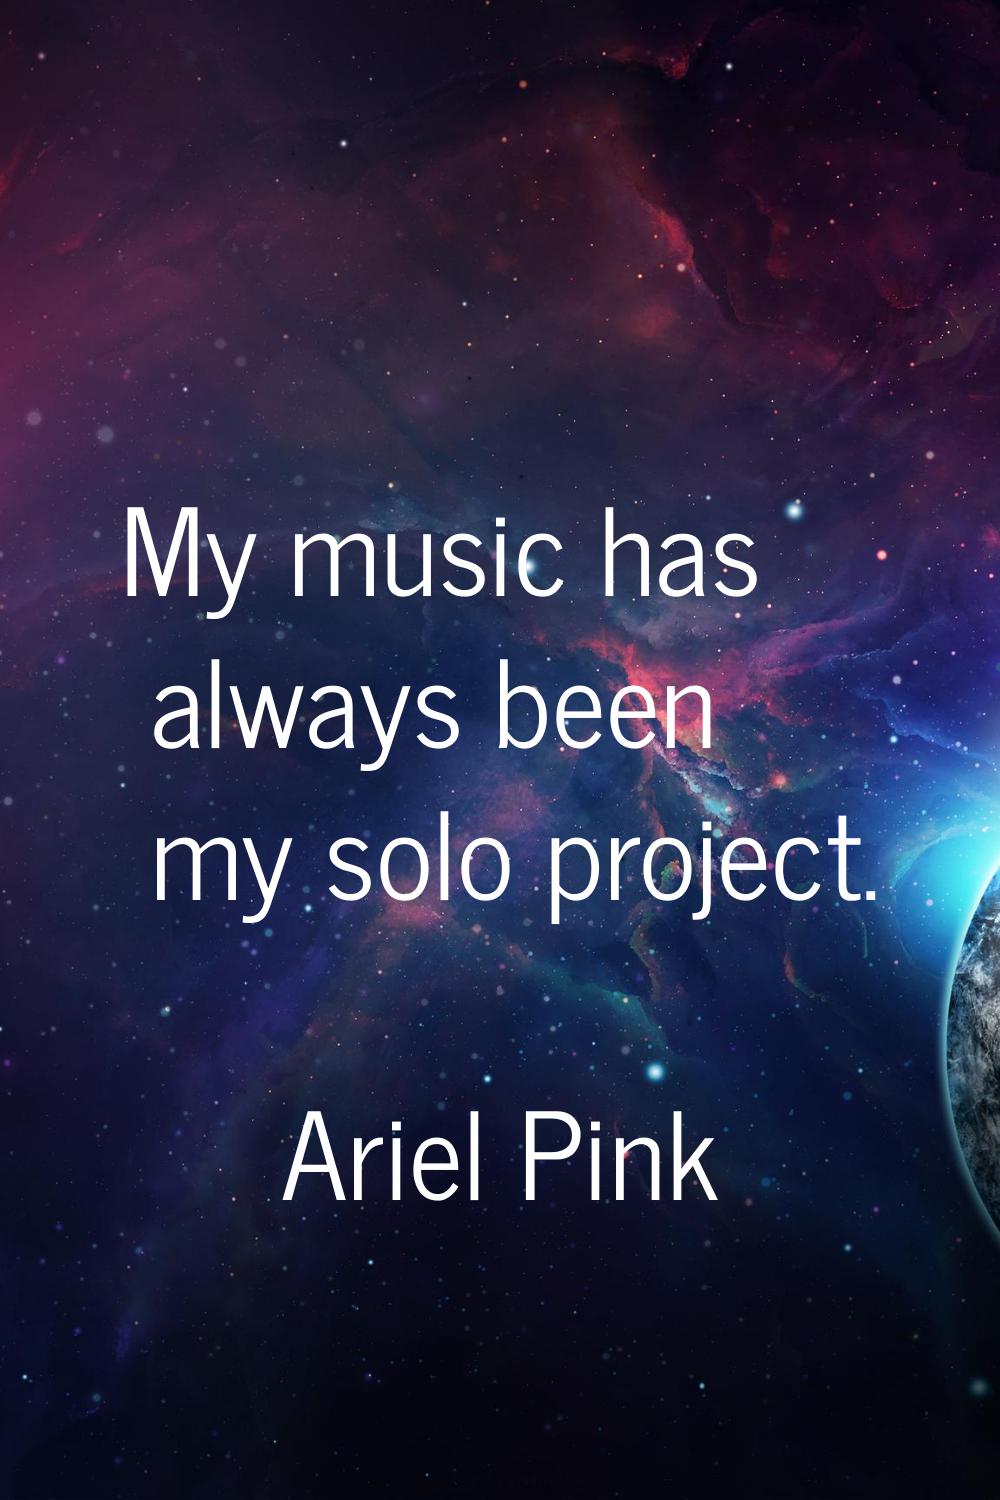 My music has always been my solo project.